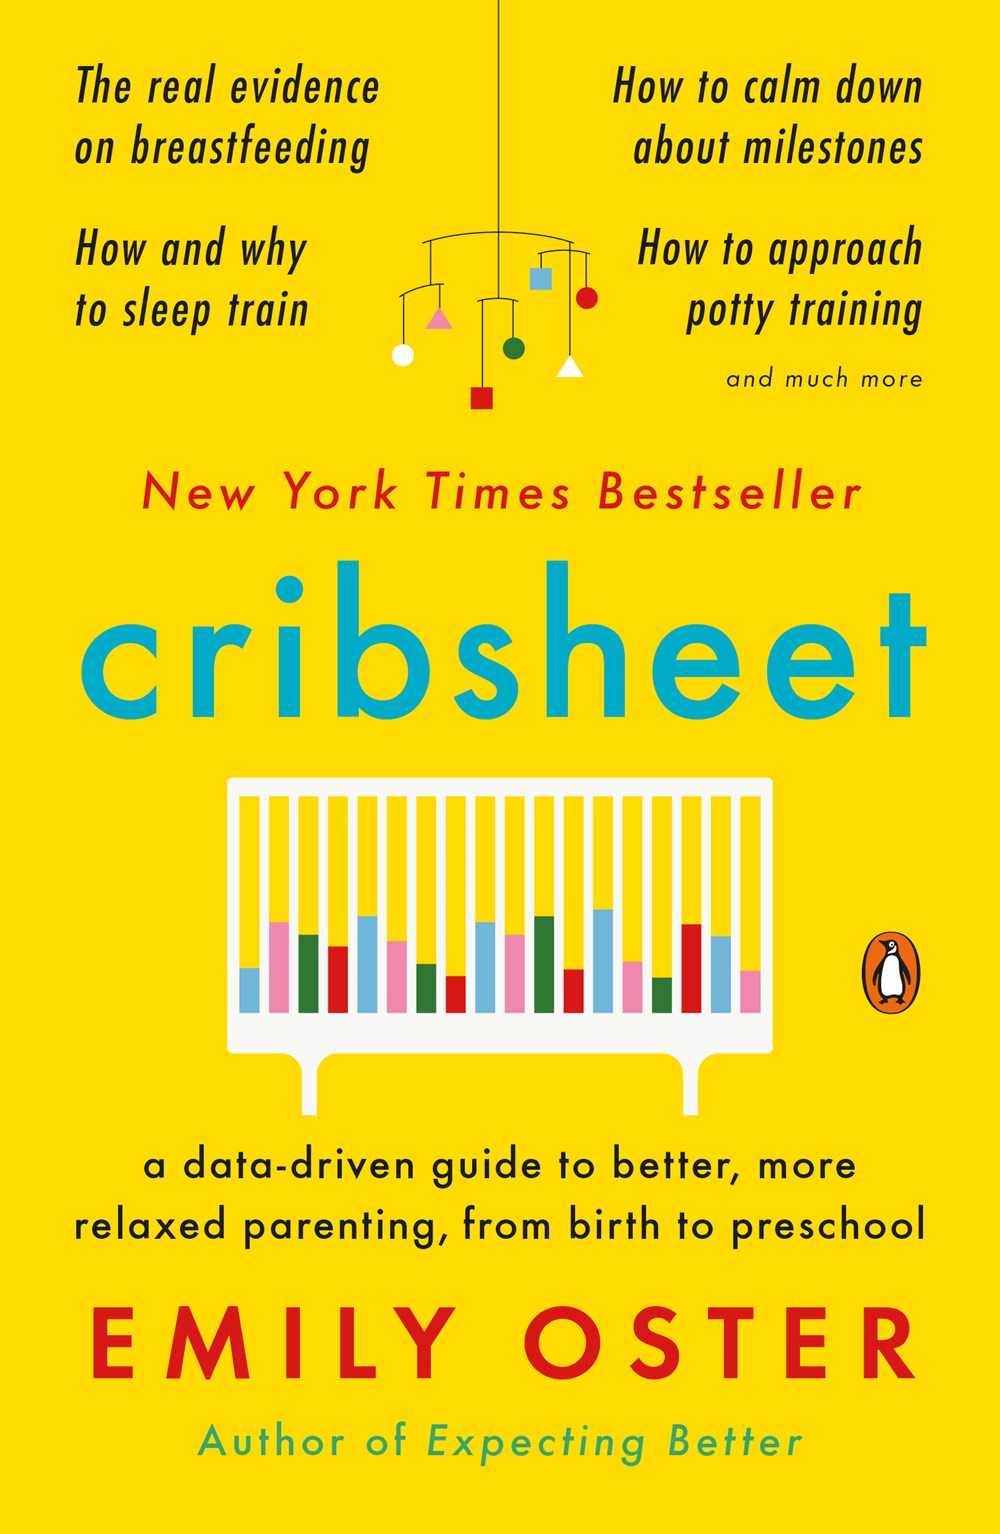 Cribsheet: A Data-Driven Guide to Better, More Relaxed Parenting from Birth to Preschool by Emily Oster